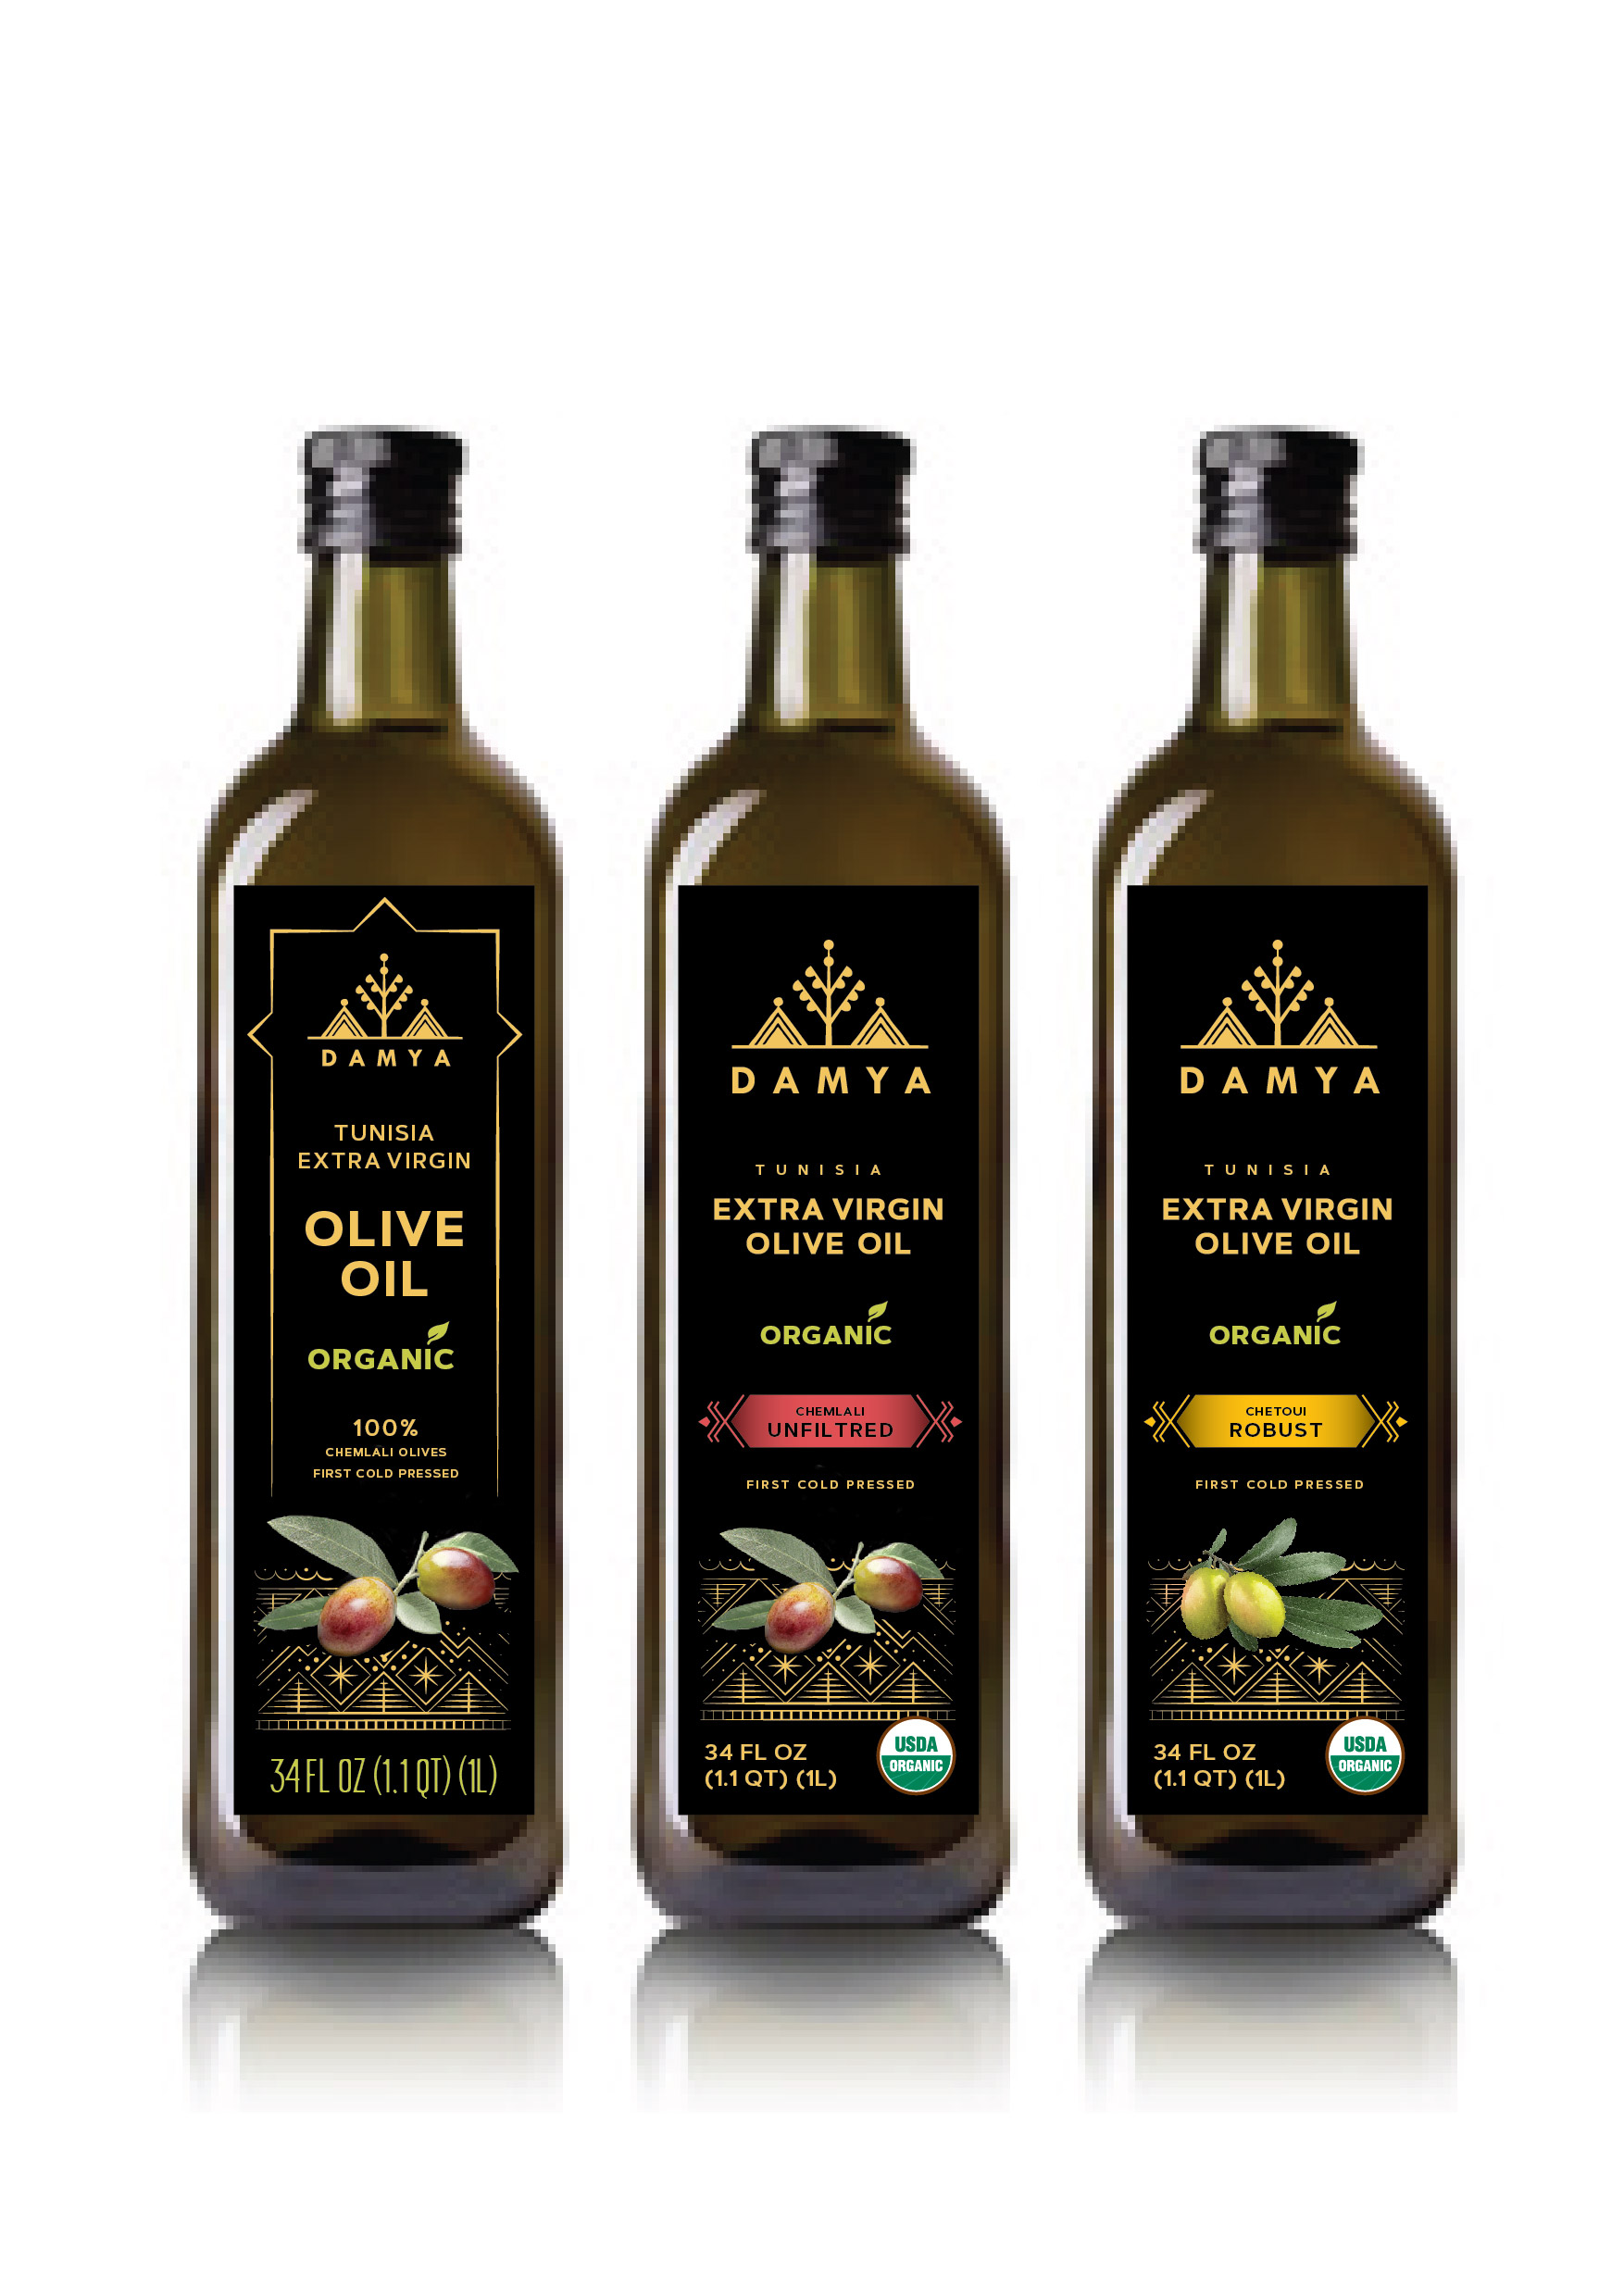 Packaging huile d’olive bio